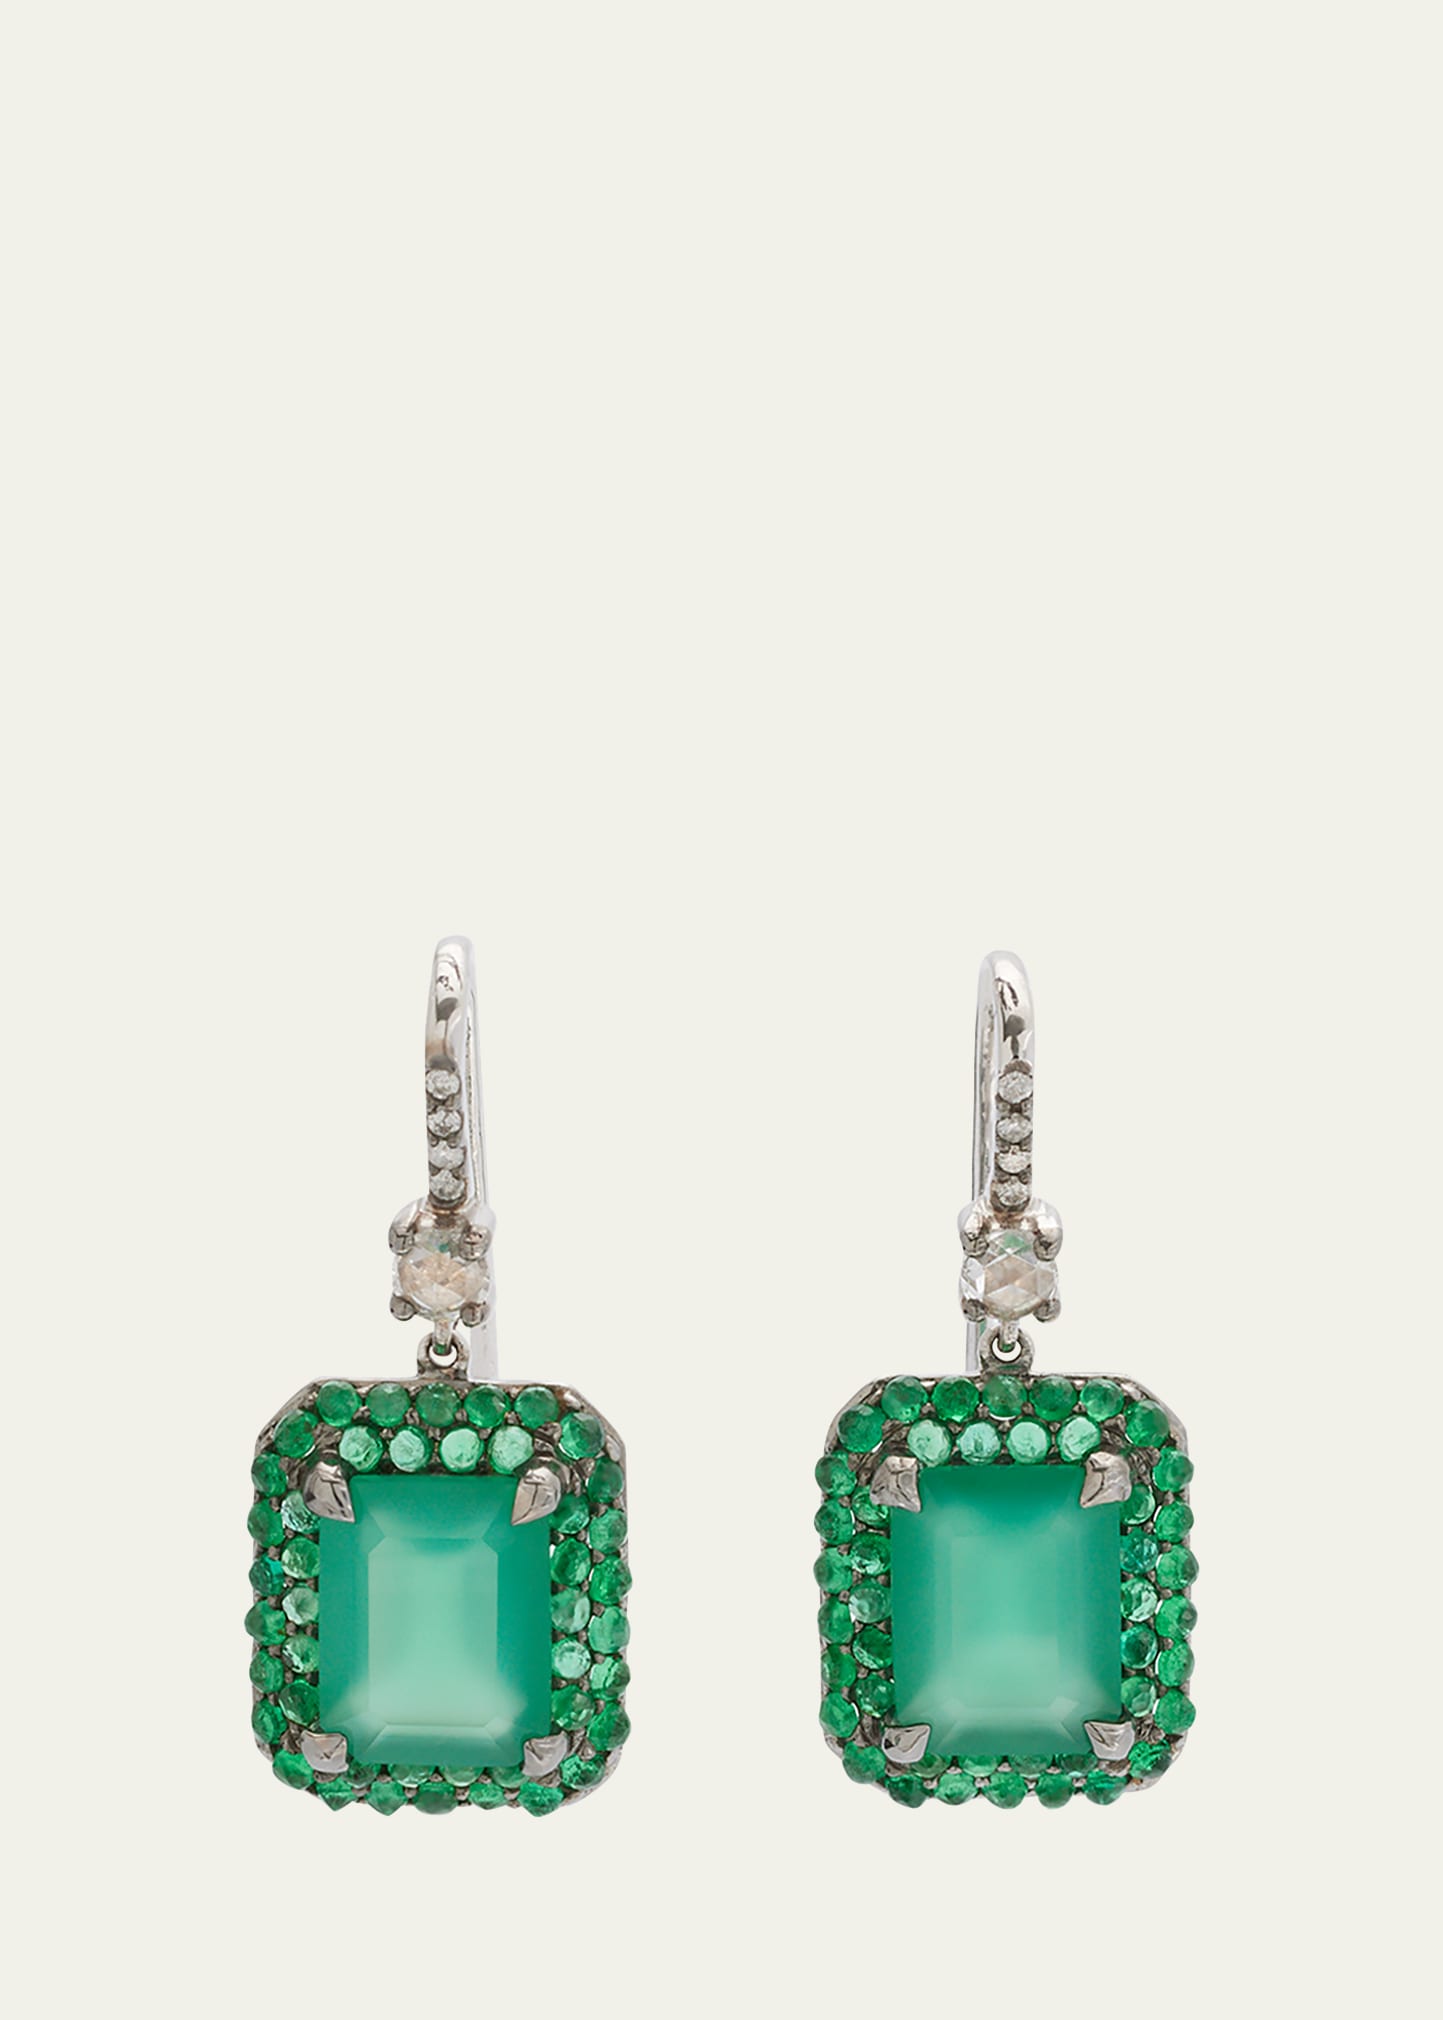 White Gold and Black Rhodium Octagon Earrings with Green Onyx, Emerald and Diamonds